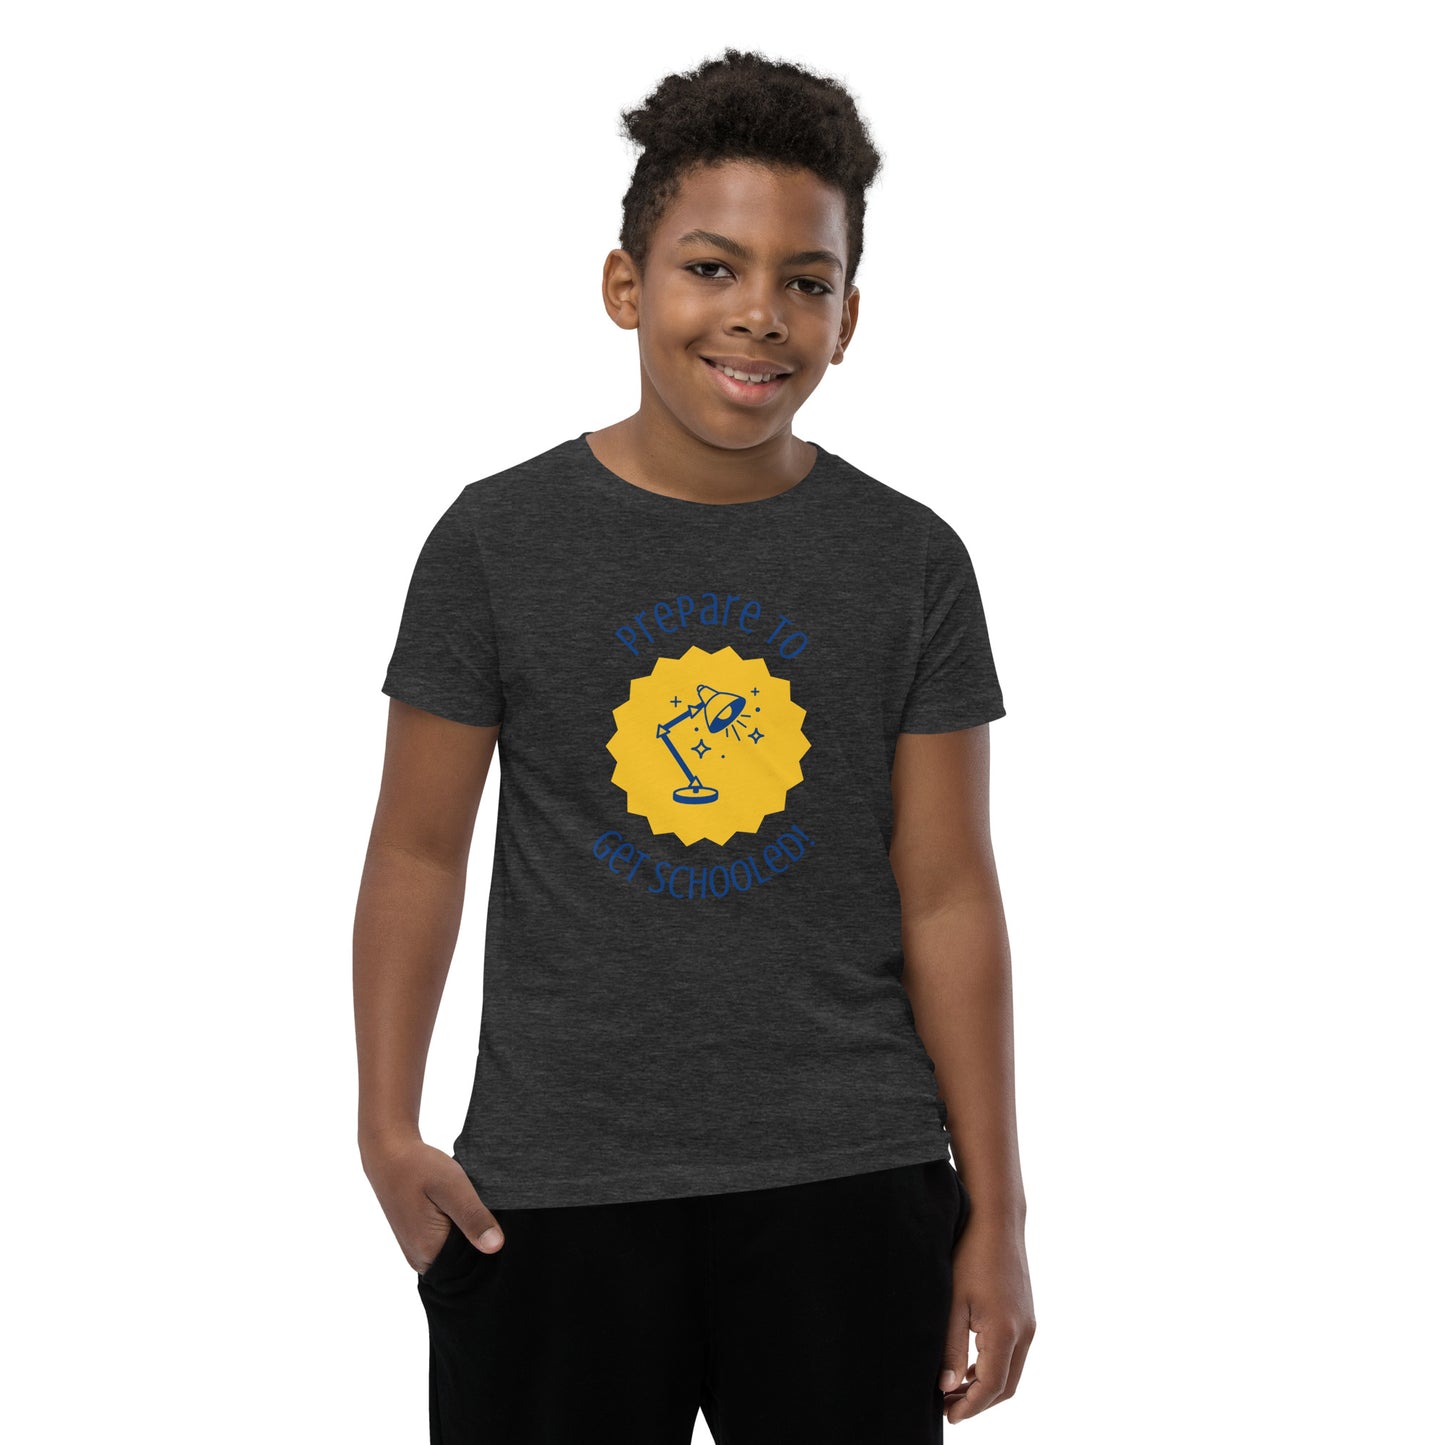 Prepare to get Schooled Youth Short Sleeve T-Shirt